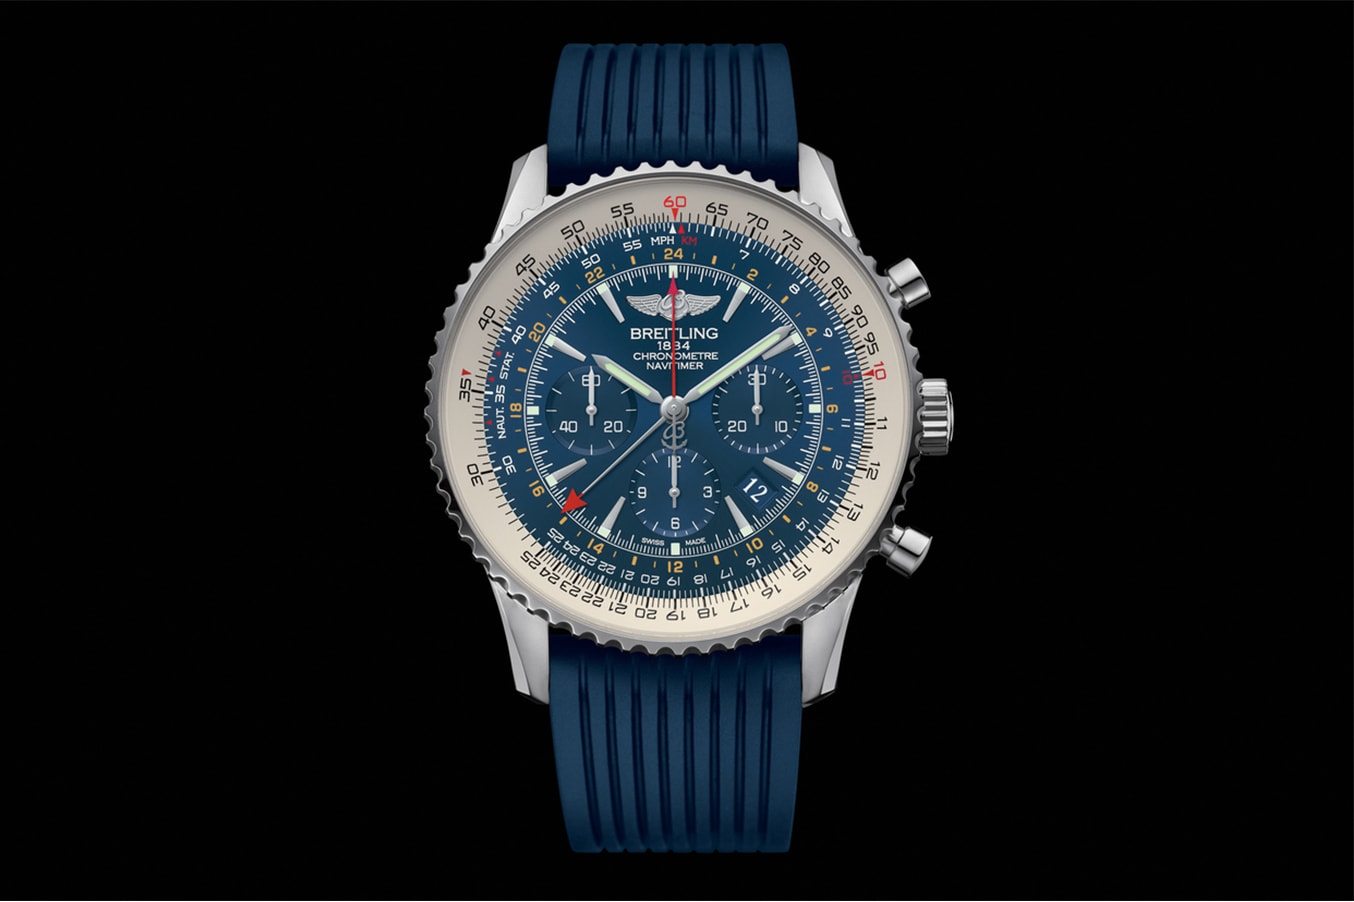 Introducing the Limited Edition Breitling Navitimer GMT Aurora Blue 1,000 pieces rubber band